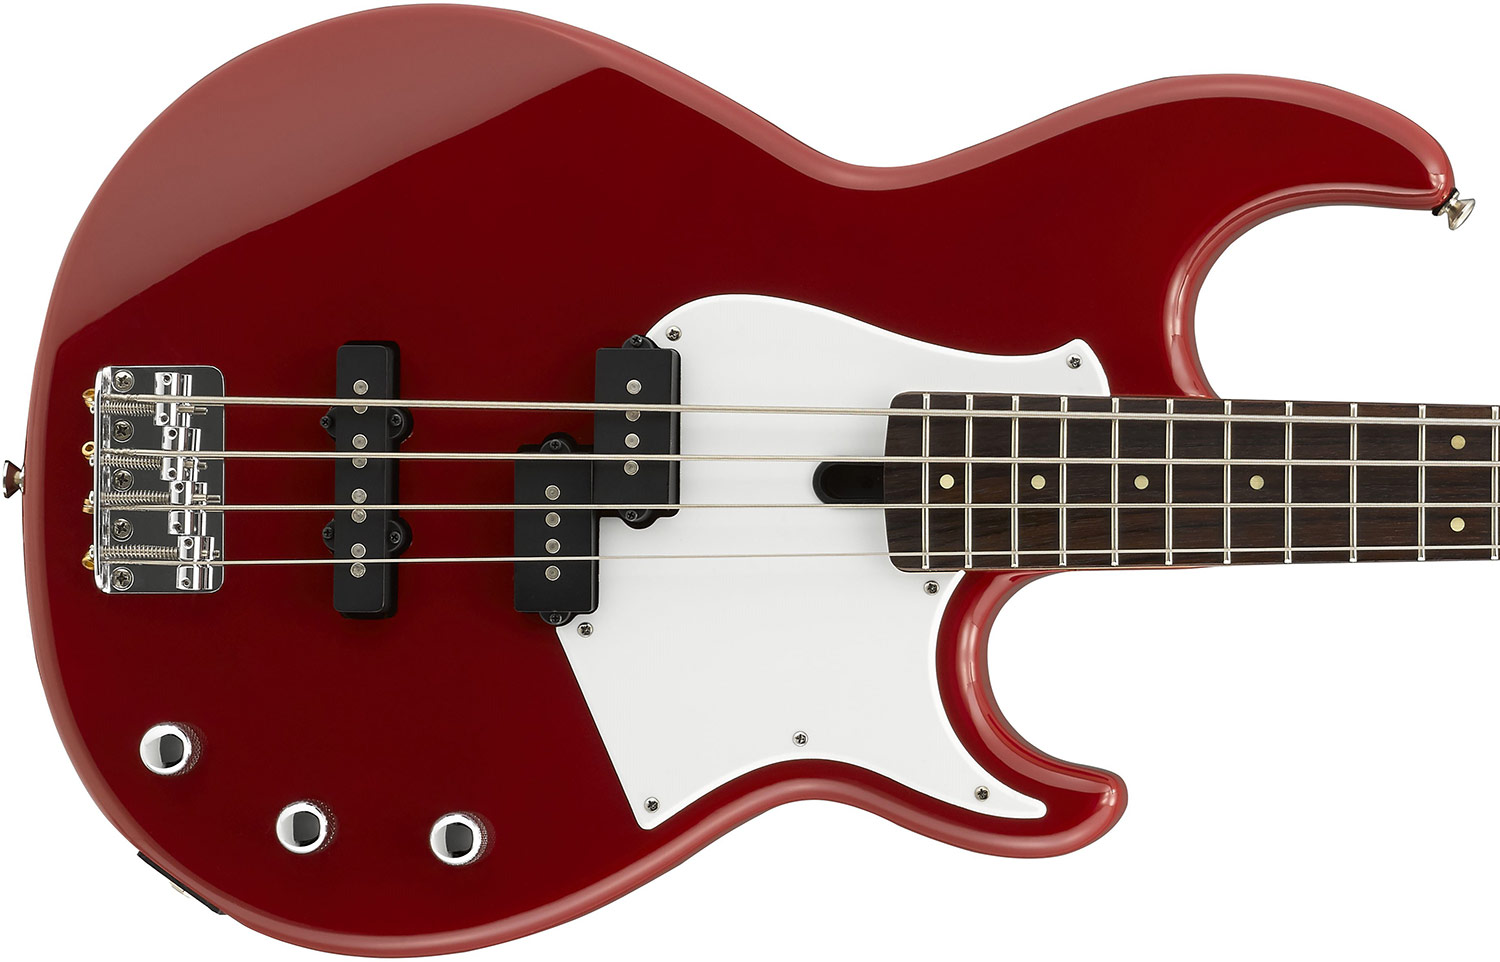 Yamaha Bb234 Rr Rw - Raspberry Red - Basse Électrique Solid Body - Variation 1